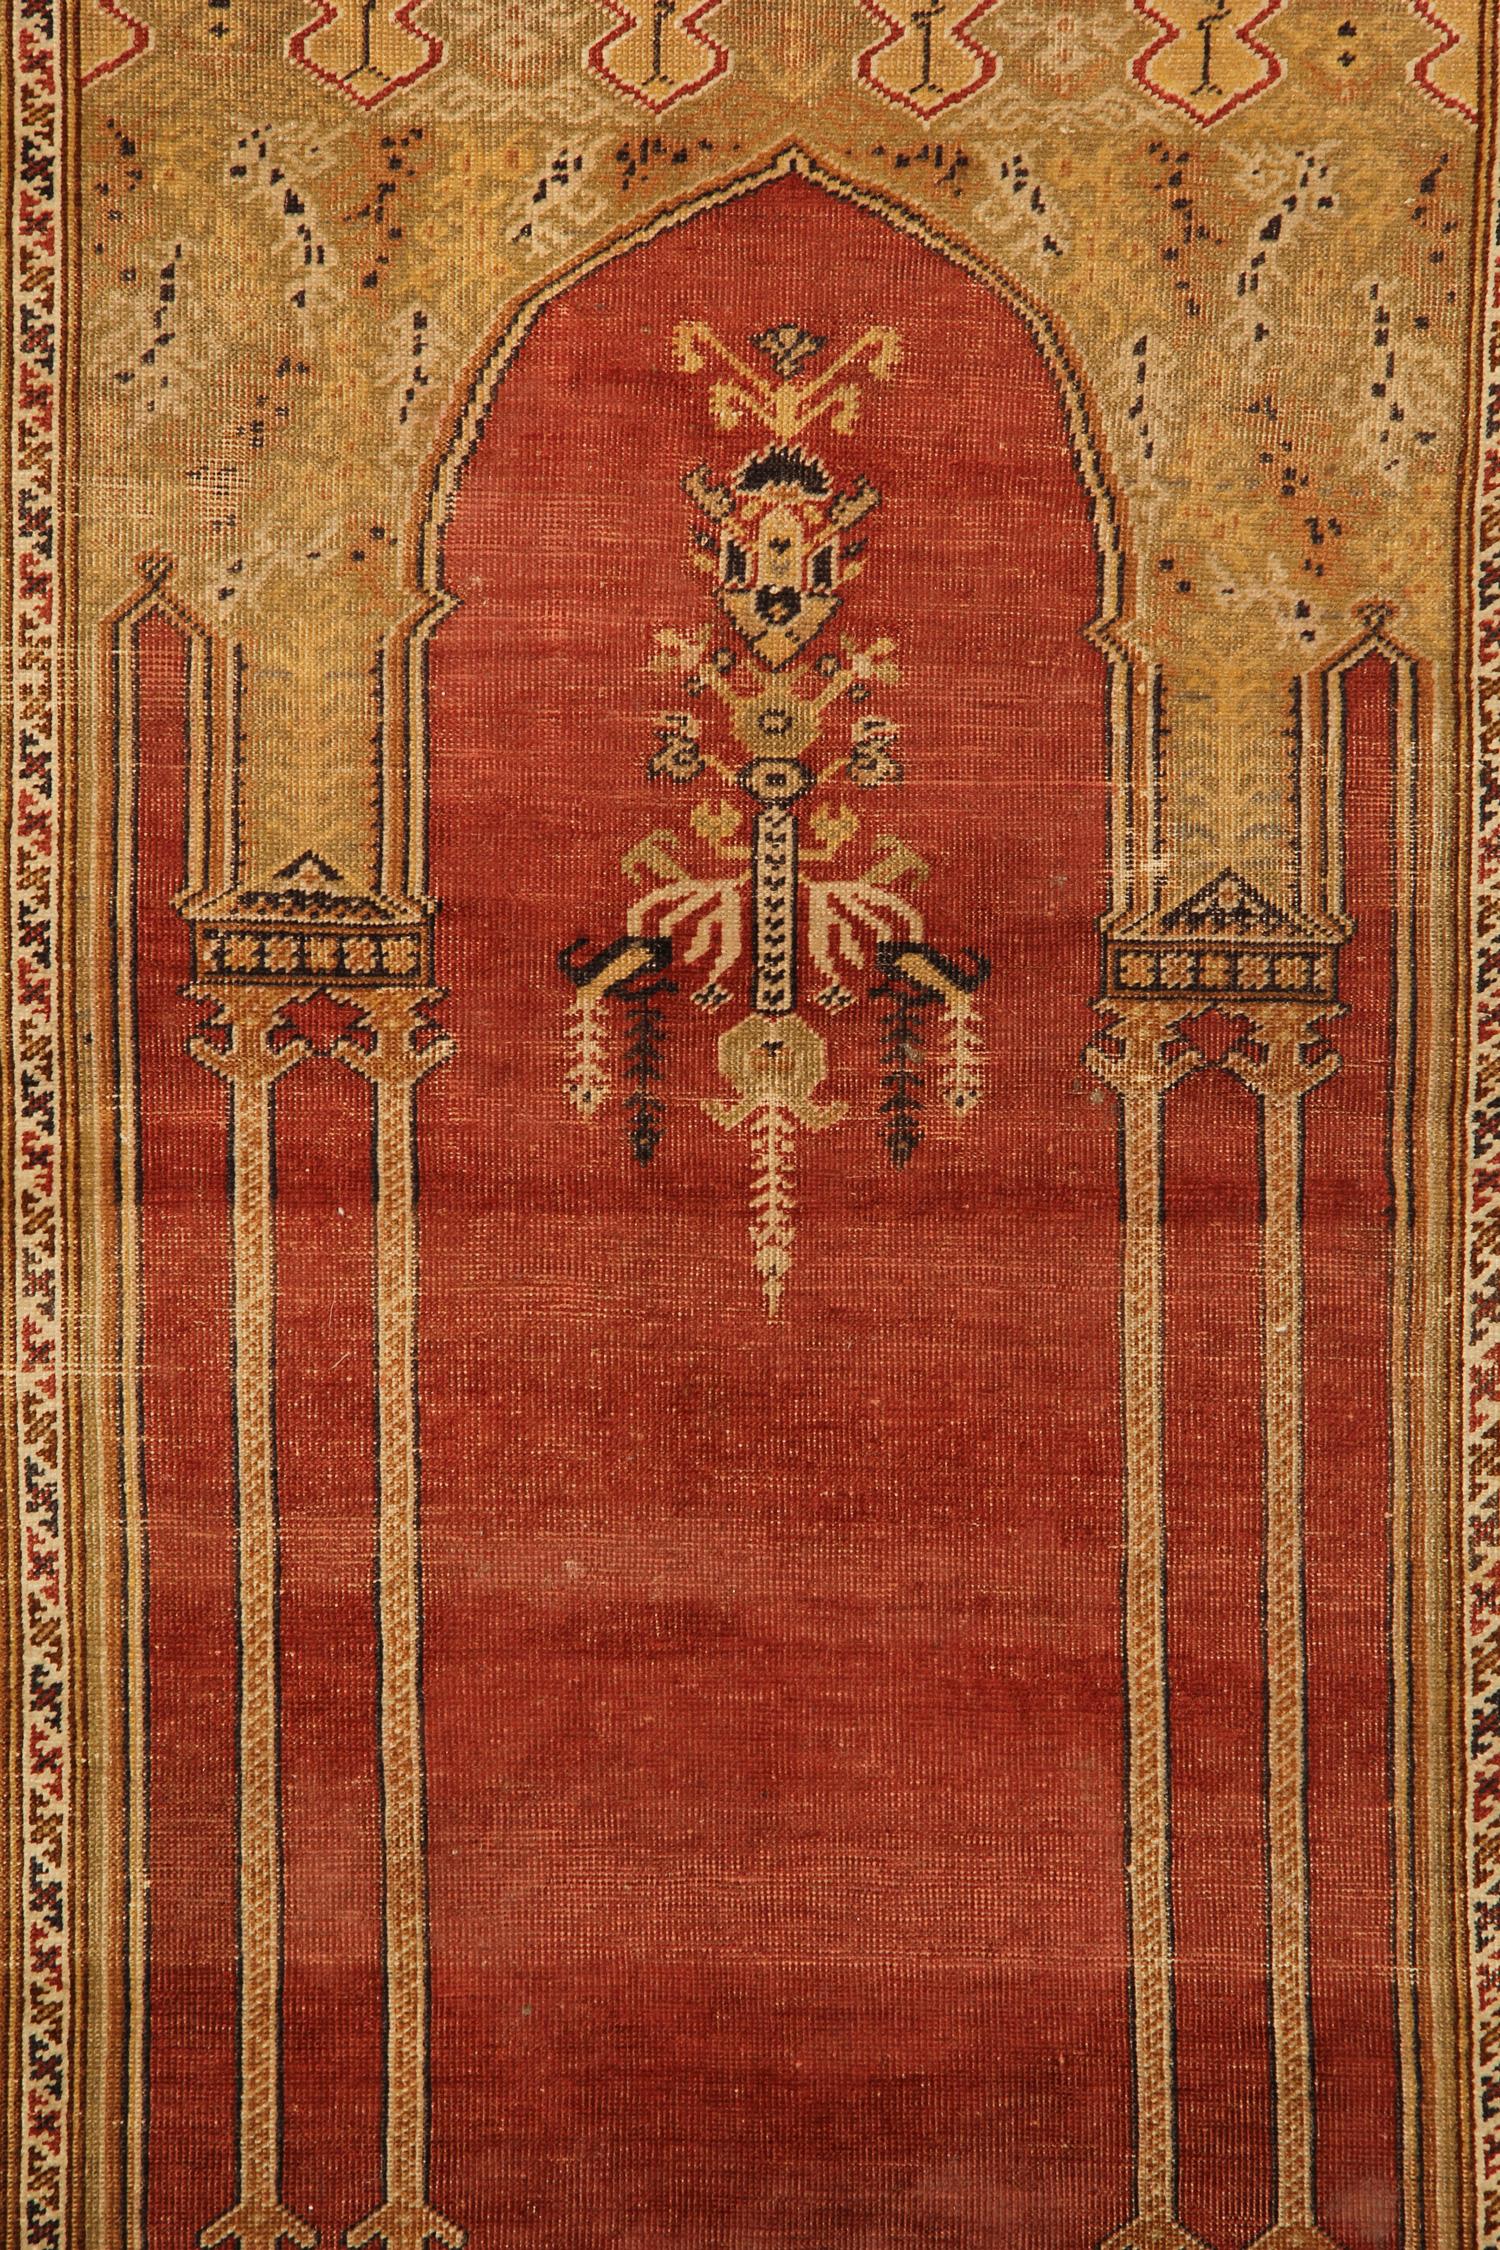 The design in this carpet is most distinctive and is know as prayer designs for over a thousand years. One can find the connotation of the design back to pre-Islamic Persia, where the architectural plan was coined and implemented by designers for